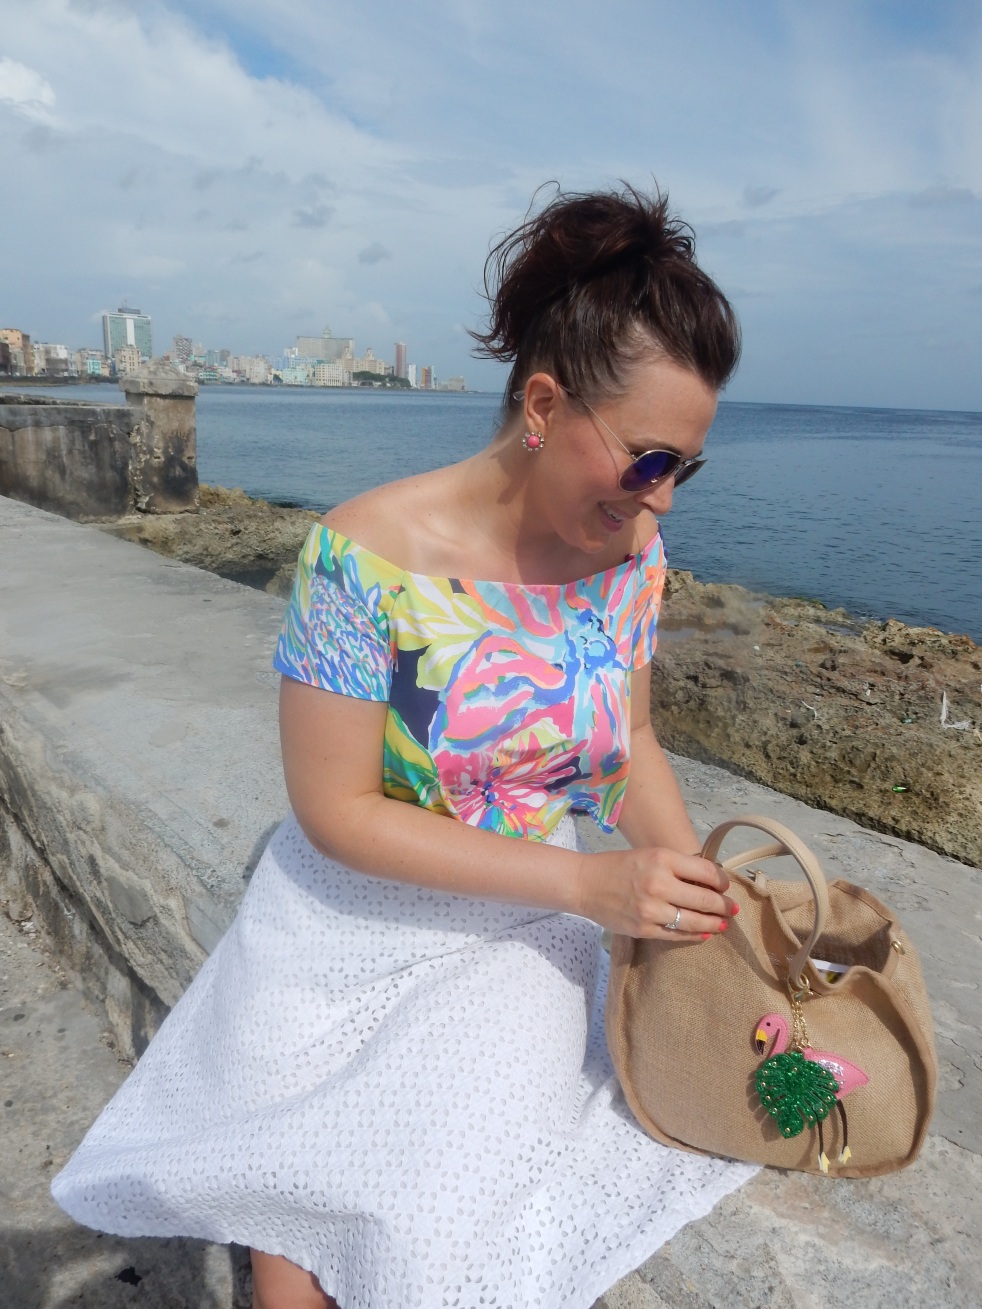 Cuba, Havana, Cuban Style, Cuban Flair, how to dress in cuba, sarah in style, sarah meyer, sarahinstyle.com, windy city bloggers, fashion blogger, style blogger, travel recommendations, travel ideas, cuba travel, travel blogger, travel blog, how to dress in cuba, lilly pulitzer, LOFT, Birkenstock, Charming Charlie, H&M, stylefile, white hot summer, summer whites